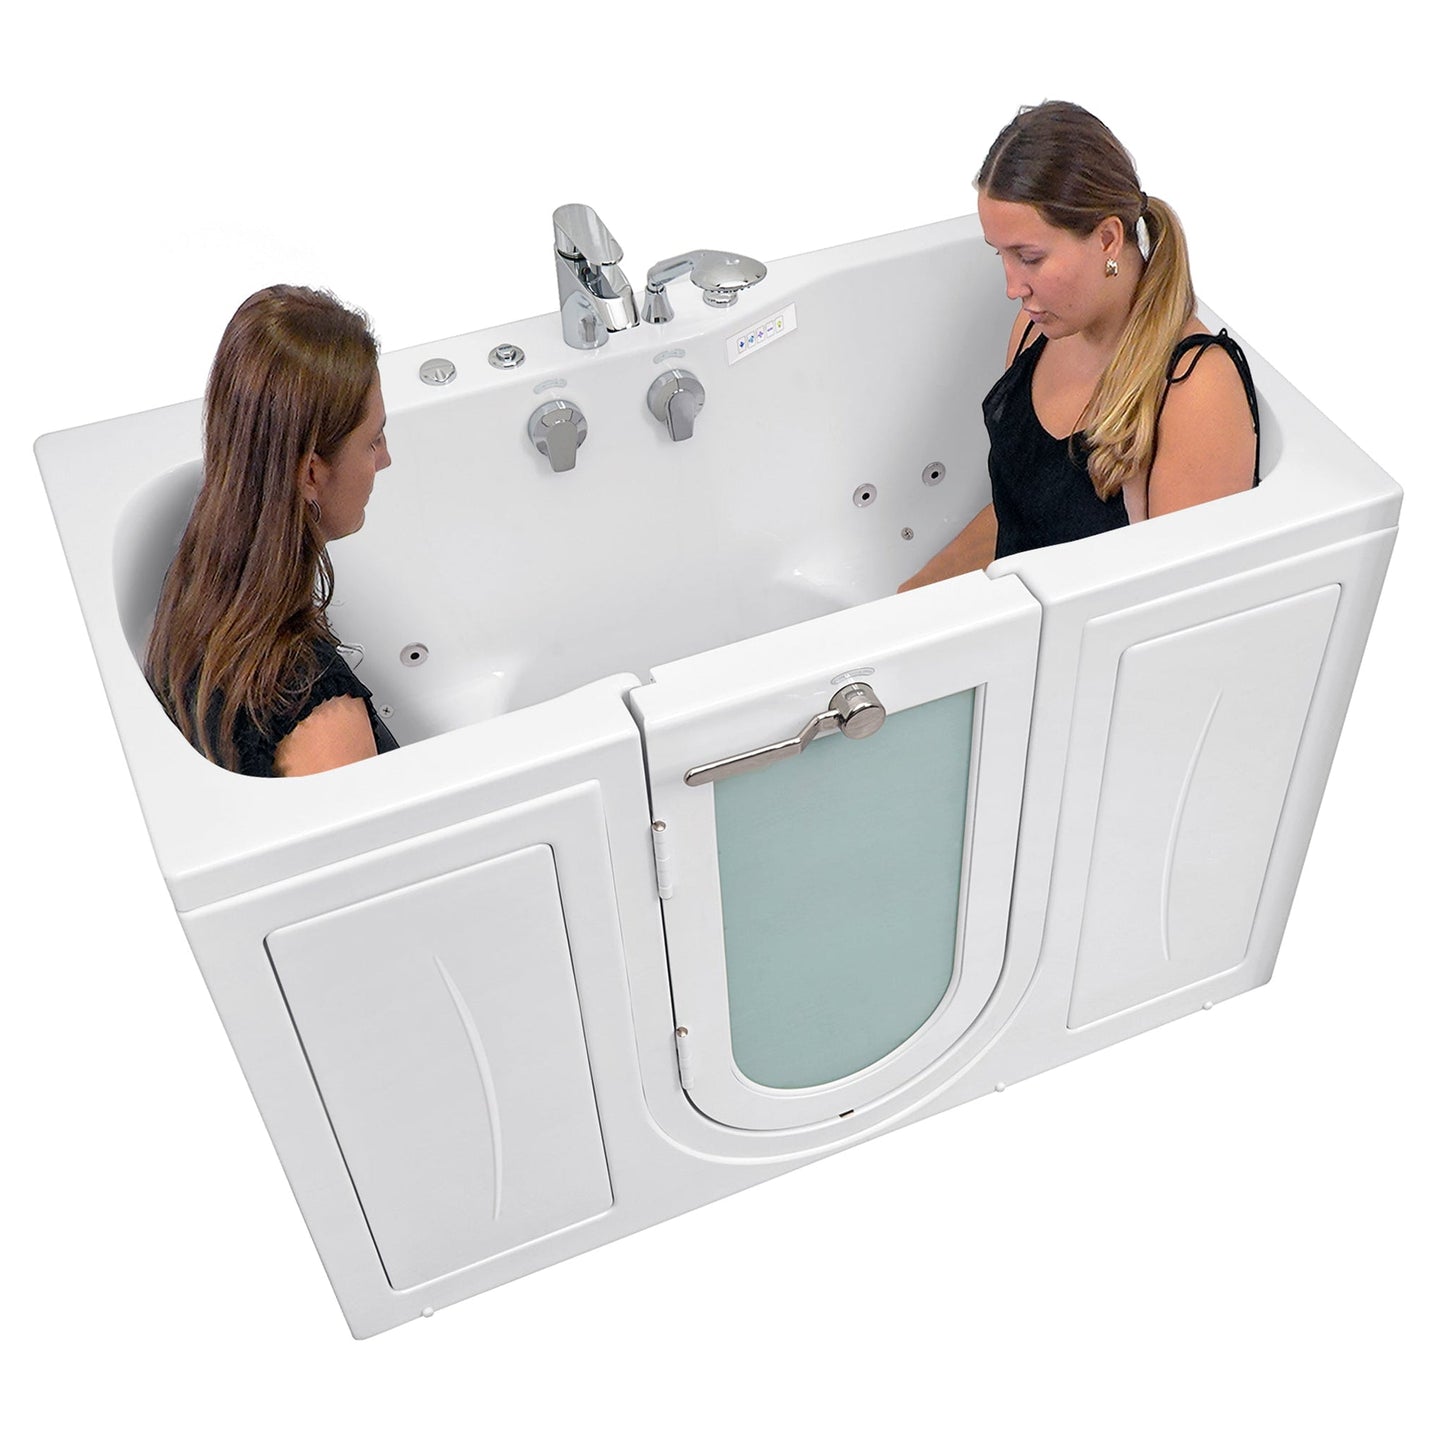 Ella's Bubbles Tub4Two 32" x 60" Two-Seated Hydro + Air Massage Walk in Bathtub With Independent Foot Massage, 2 Piece Fast Fill Faucet, 2" Dual Drains and Left U-Shape Outswing Door